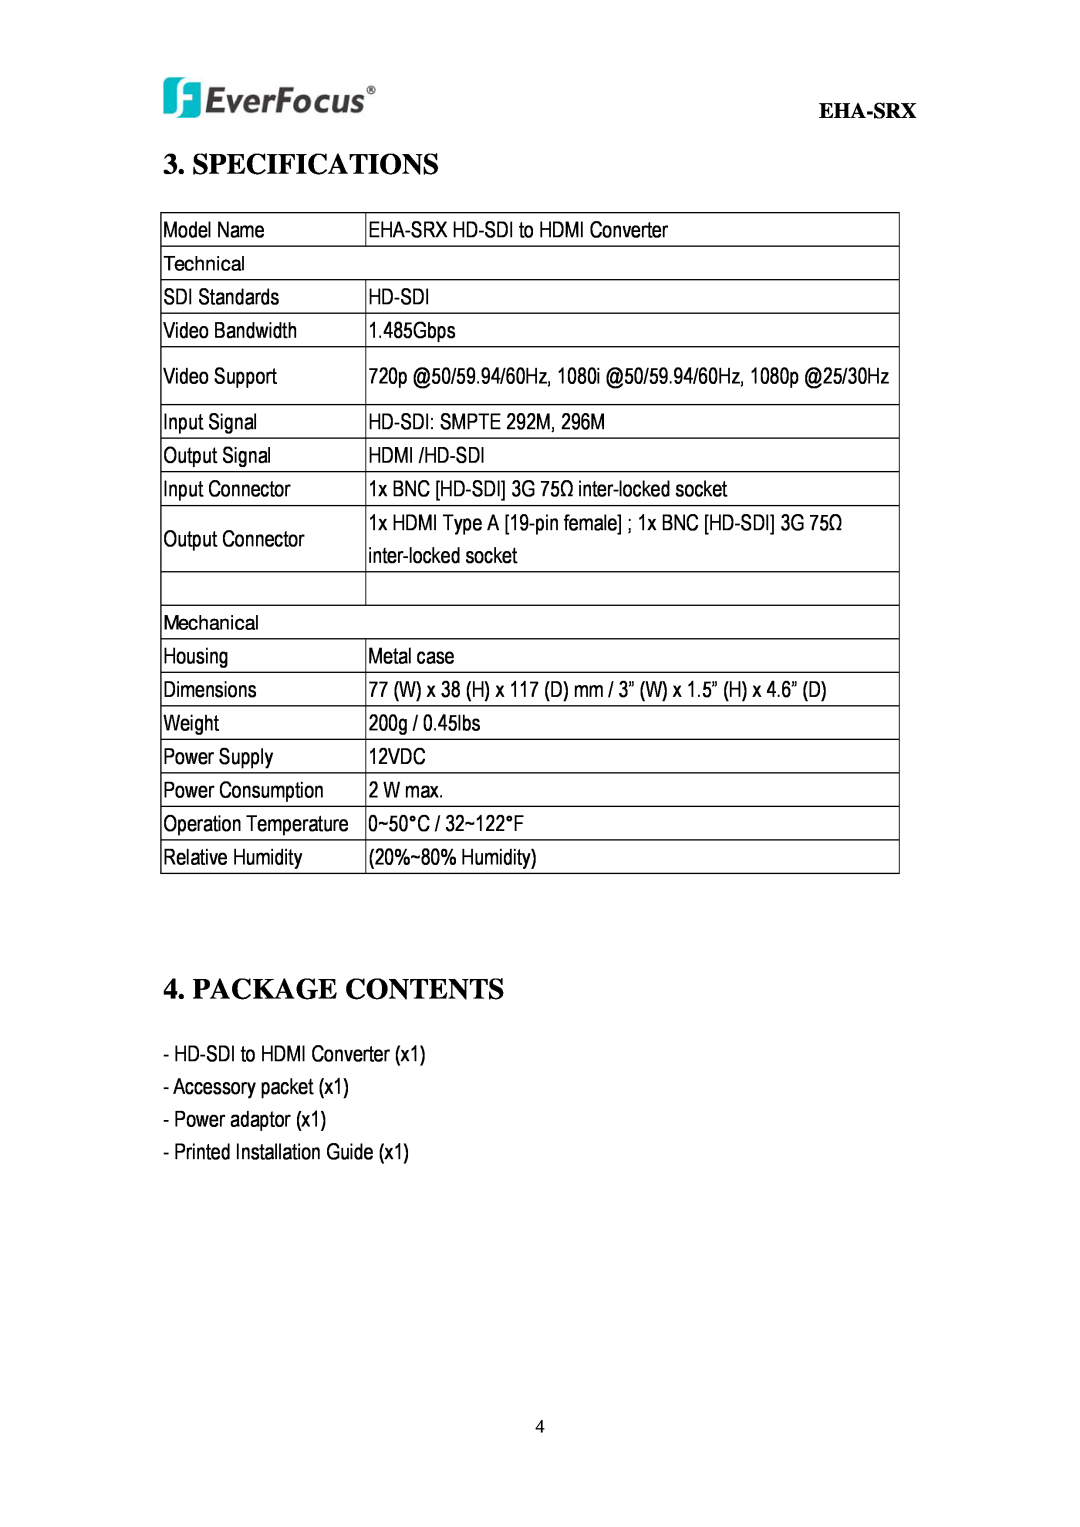 EverFocus EHA-SRX user manual Specifications, Package Contents, Eha-Srx, Technical, Mechanical 